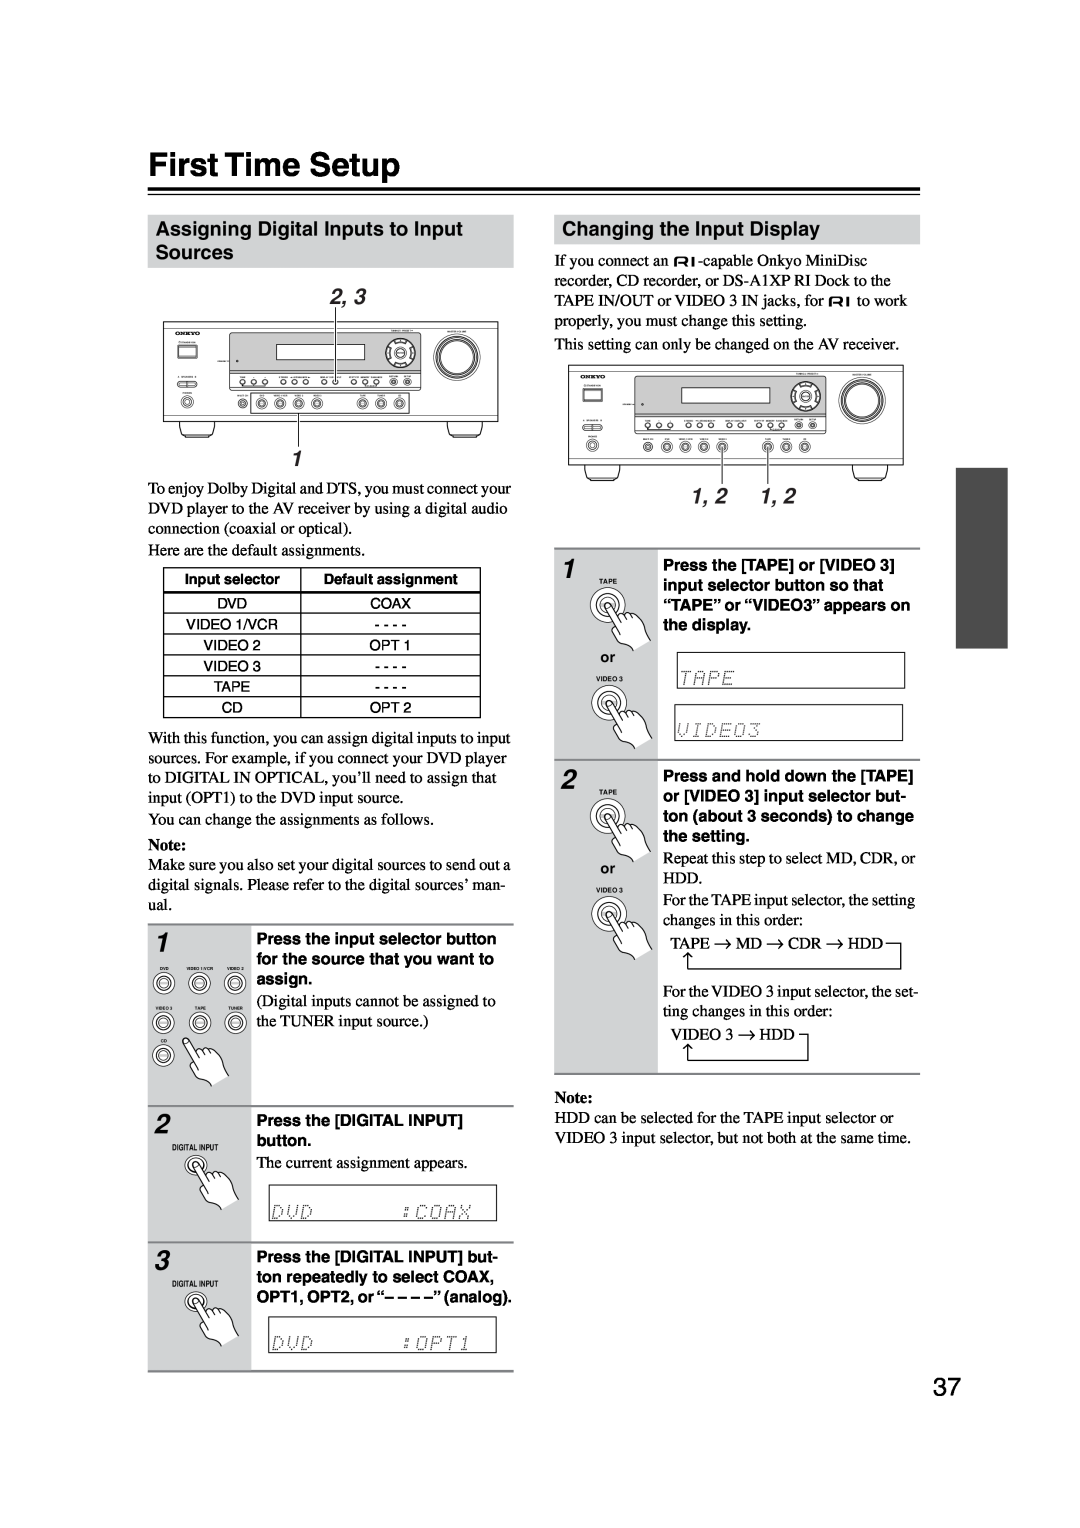 Onkyo HT-S4100 instruction manual First Time Setup, TUNER Digital inputs cannot be assigned to, the TUNER input source 